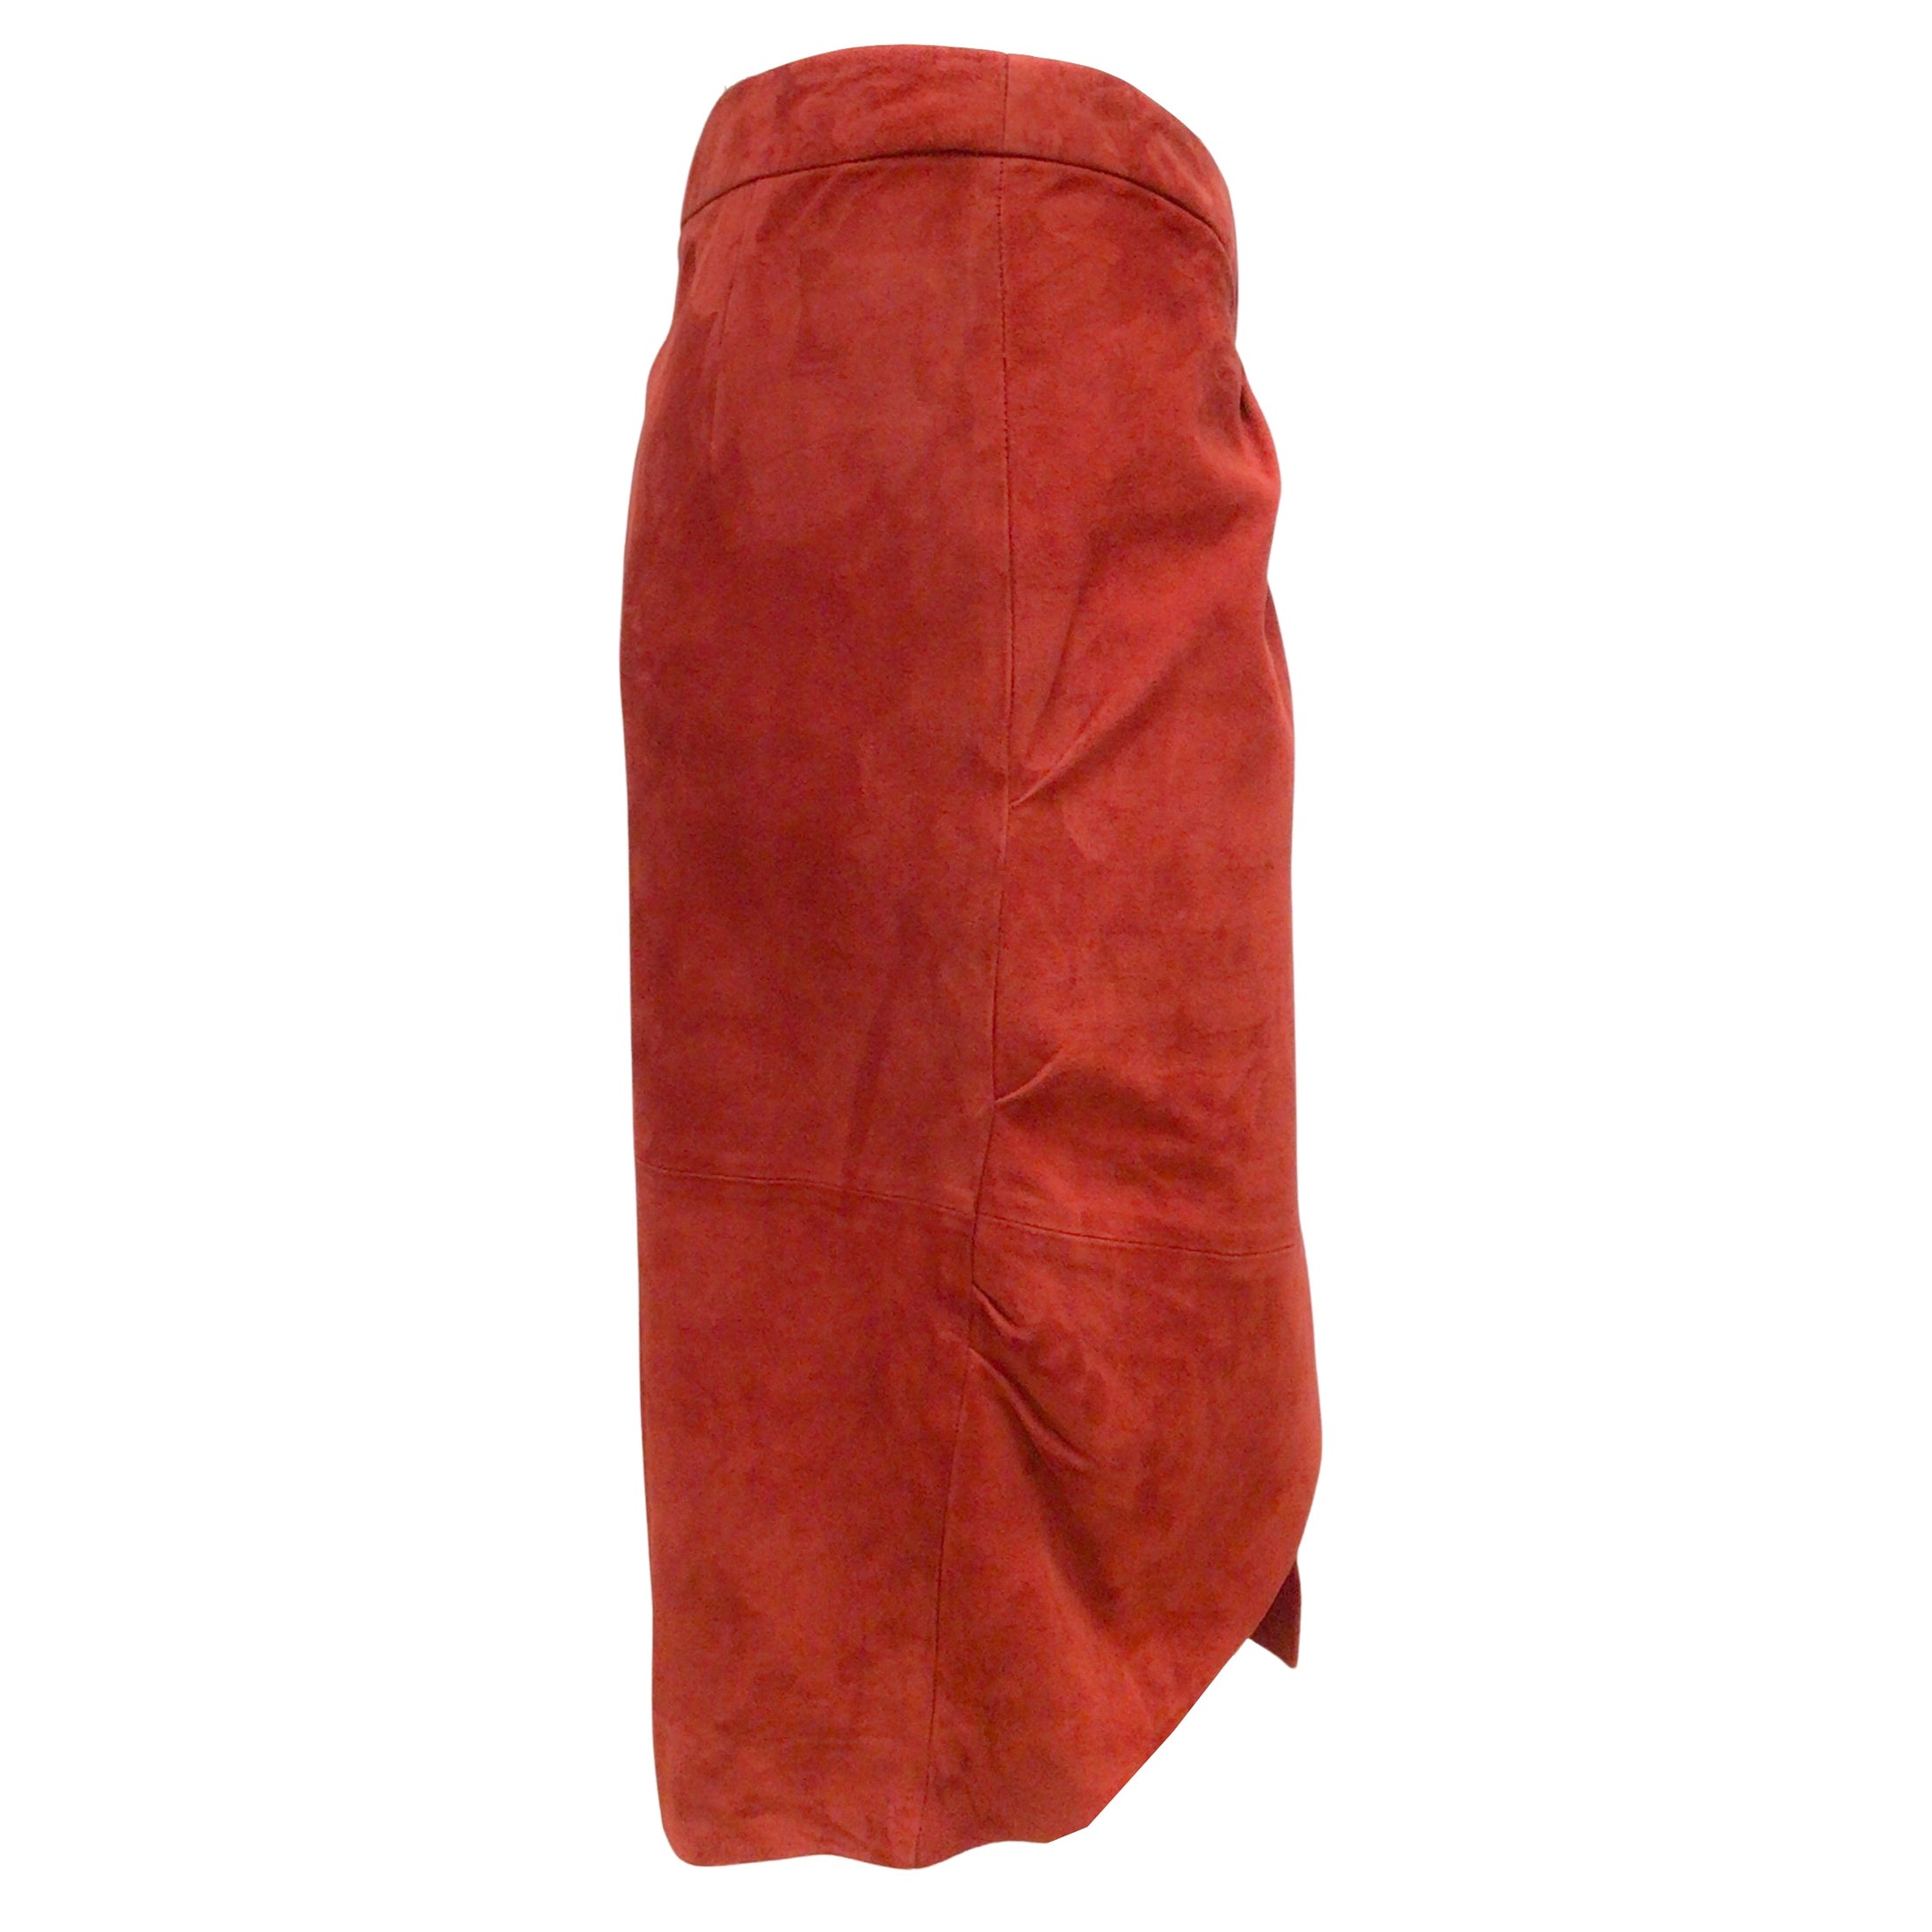 Nour Hammour Berry Red Suede Leather Wrap Skirt